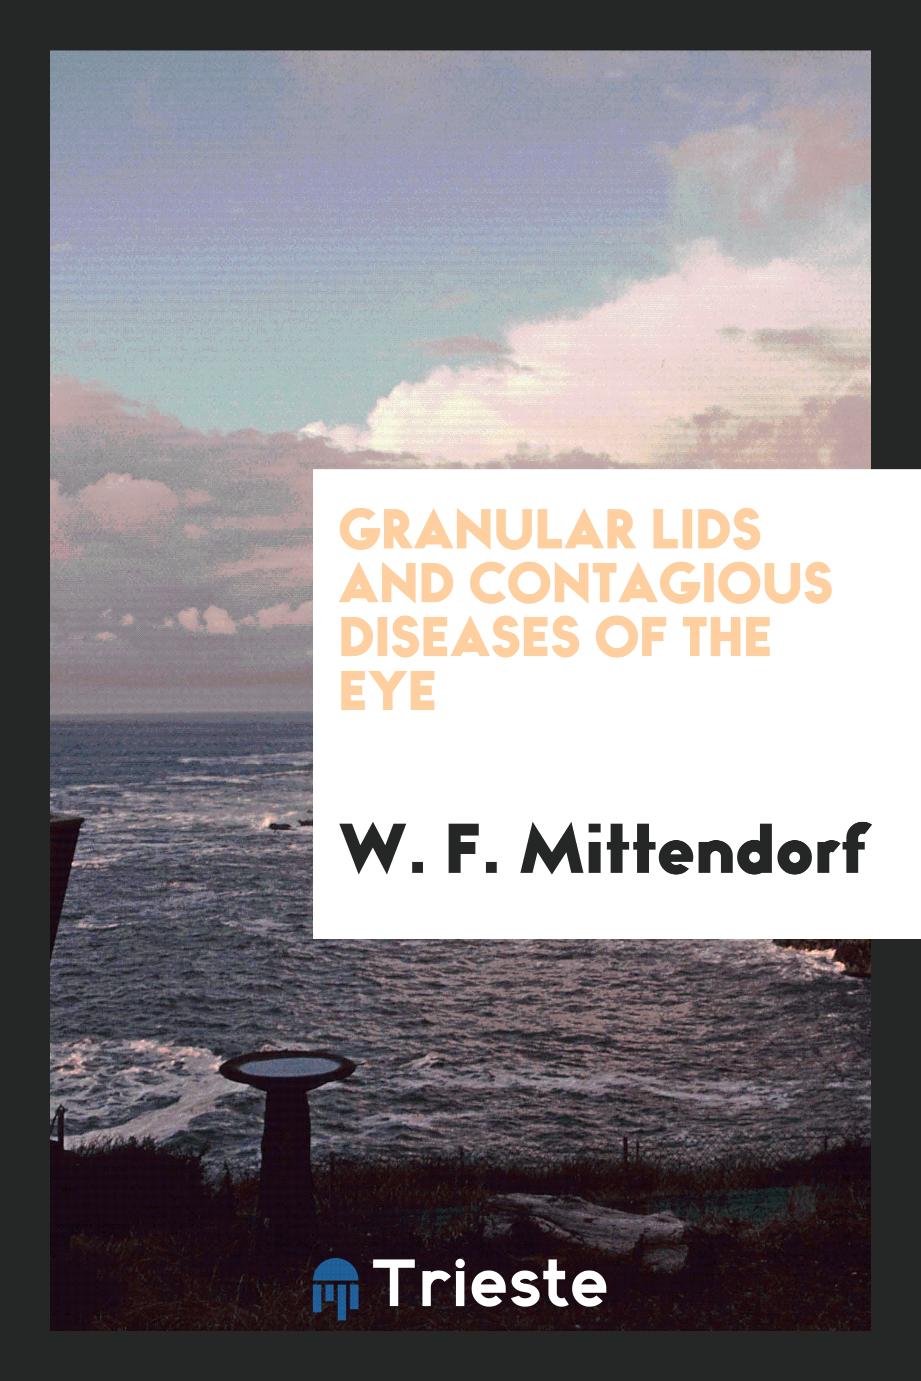 Granular Lids and Contagious Diseases of the Eye